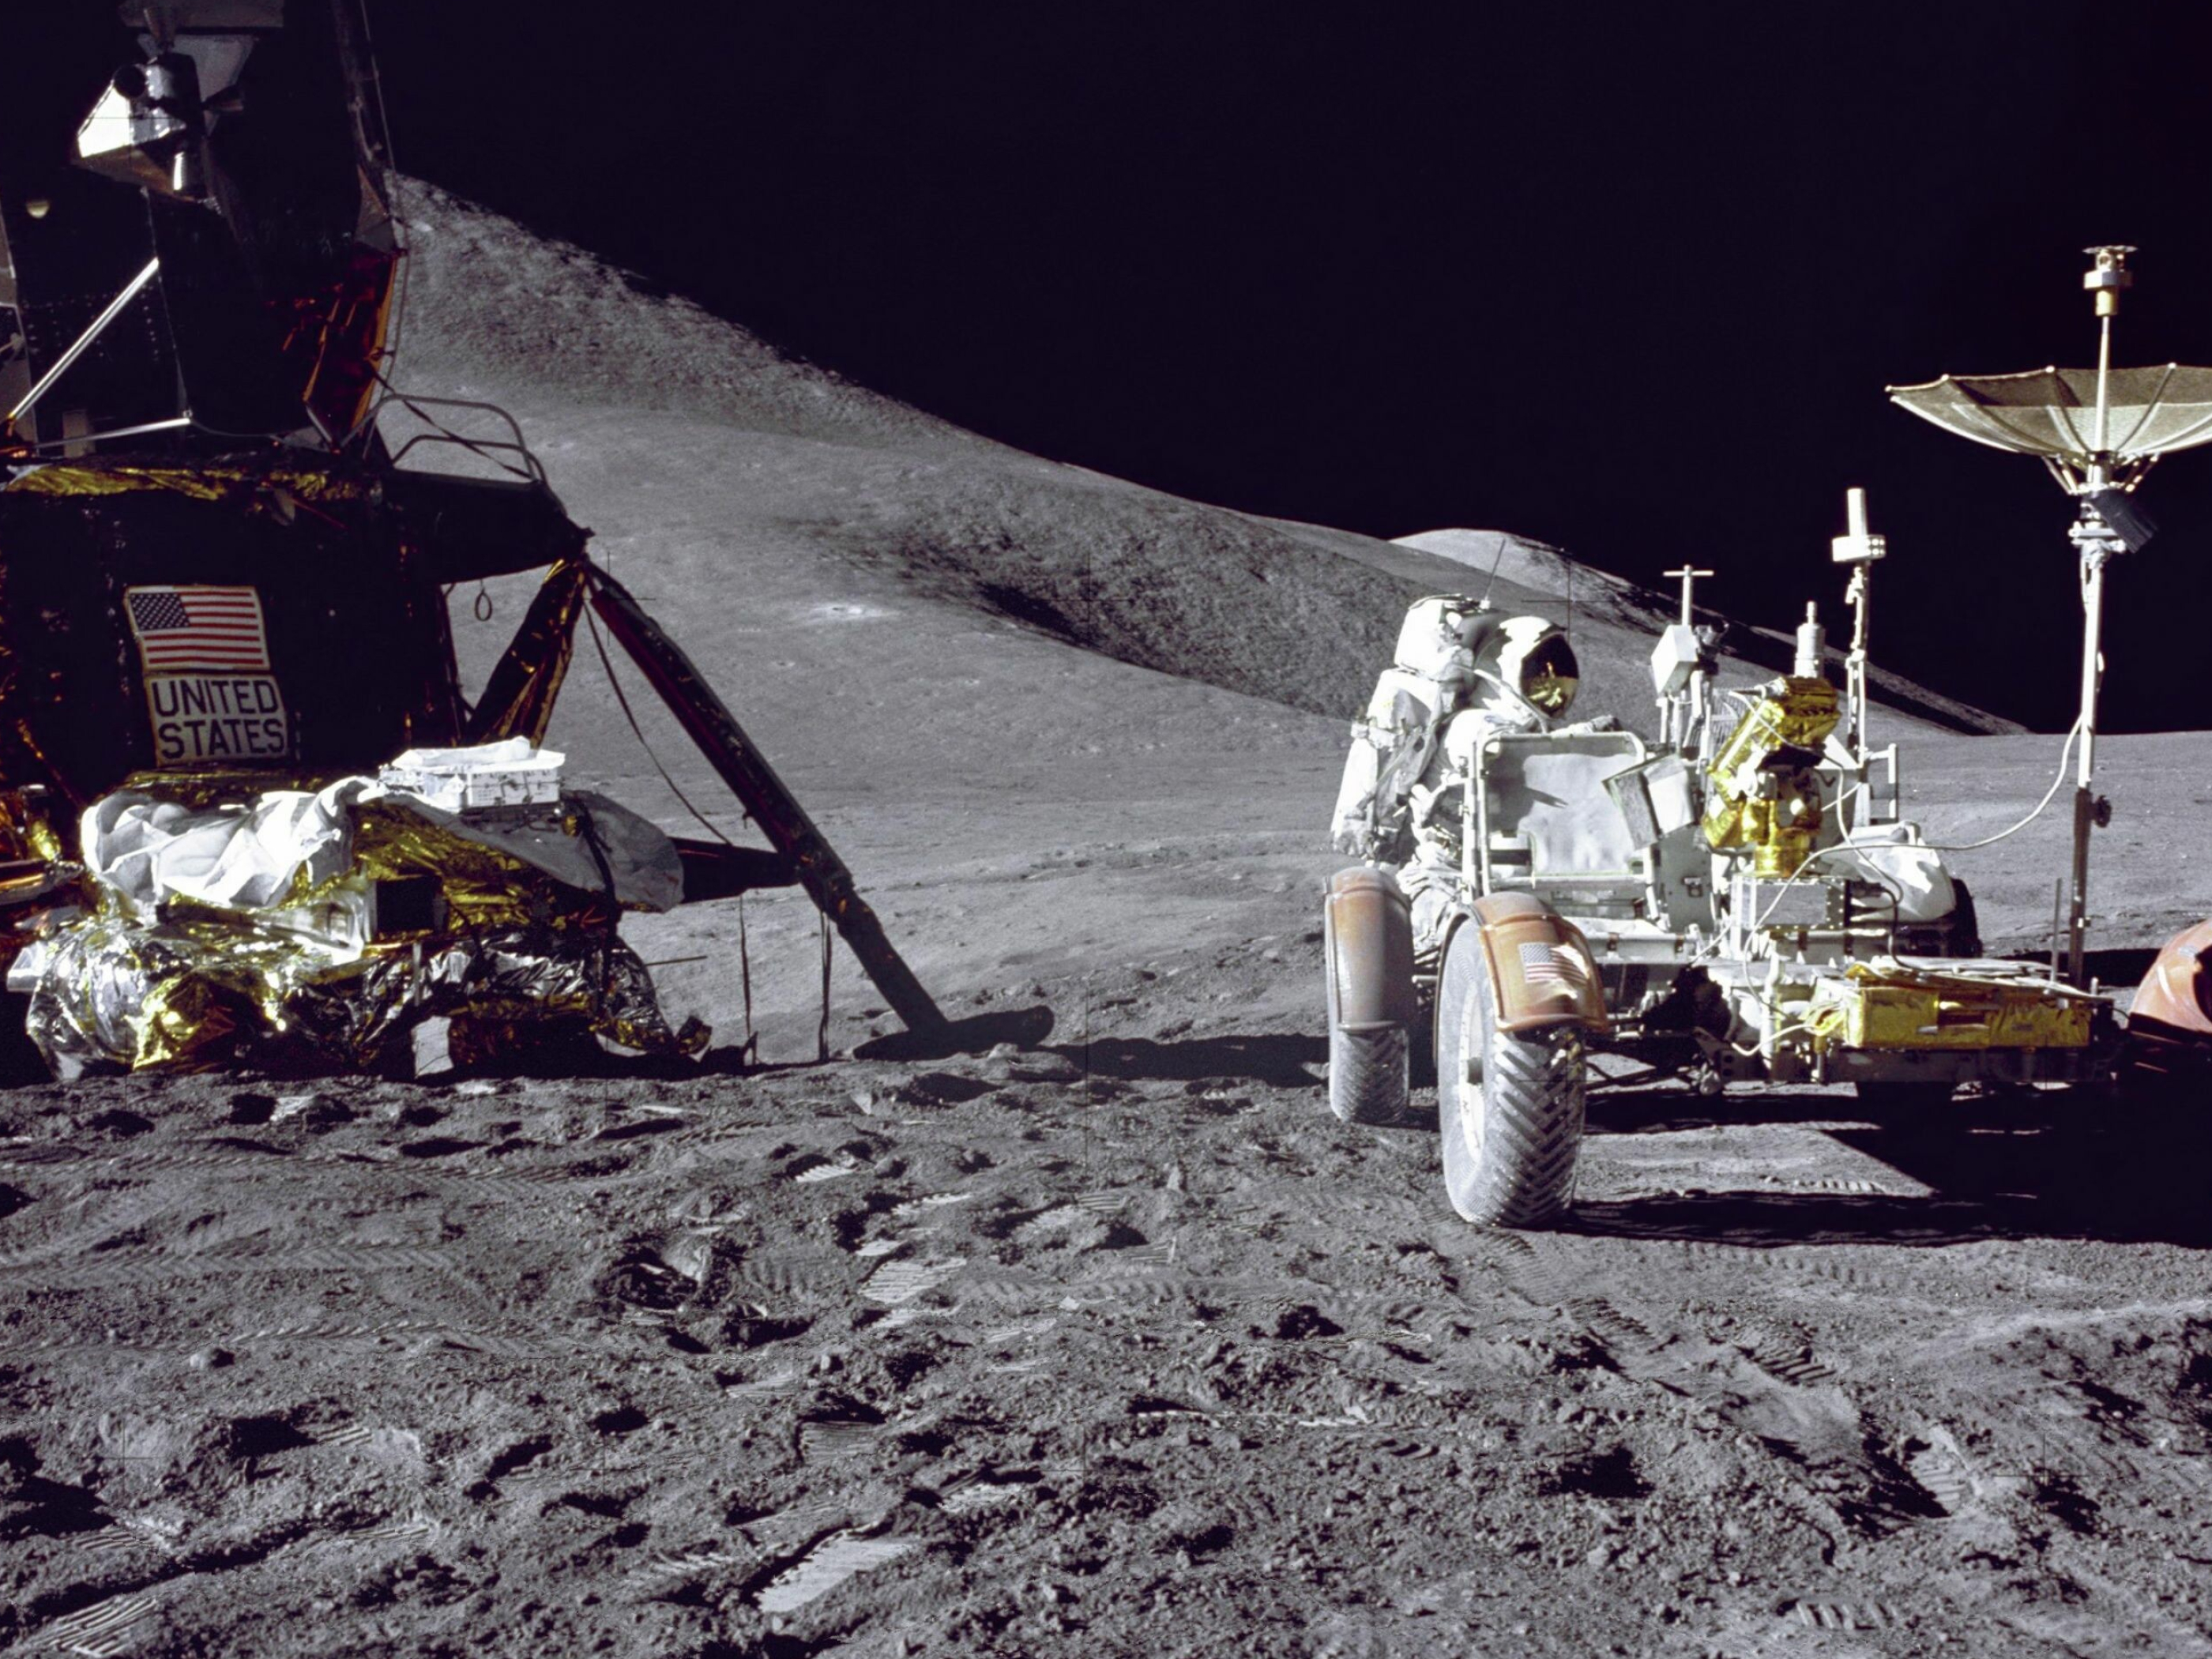 Man on the Moon: Apollo 15, James Irwin, The Lunar Roving Vehicle, United States. 2800x2100 HD Wallpaper.